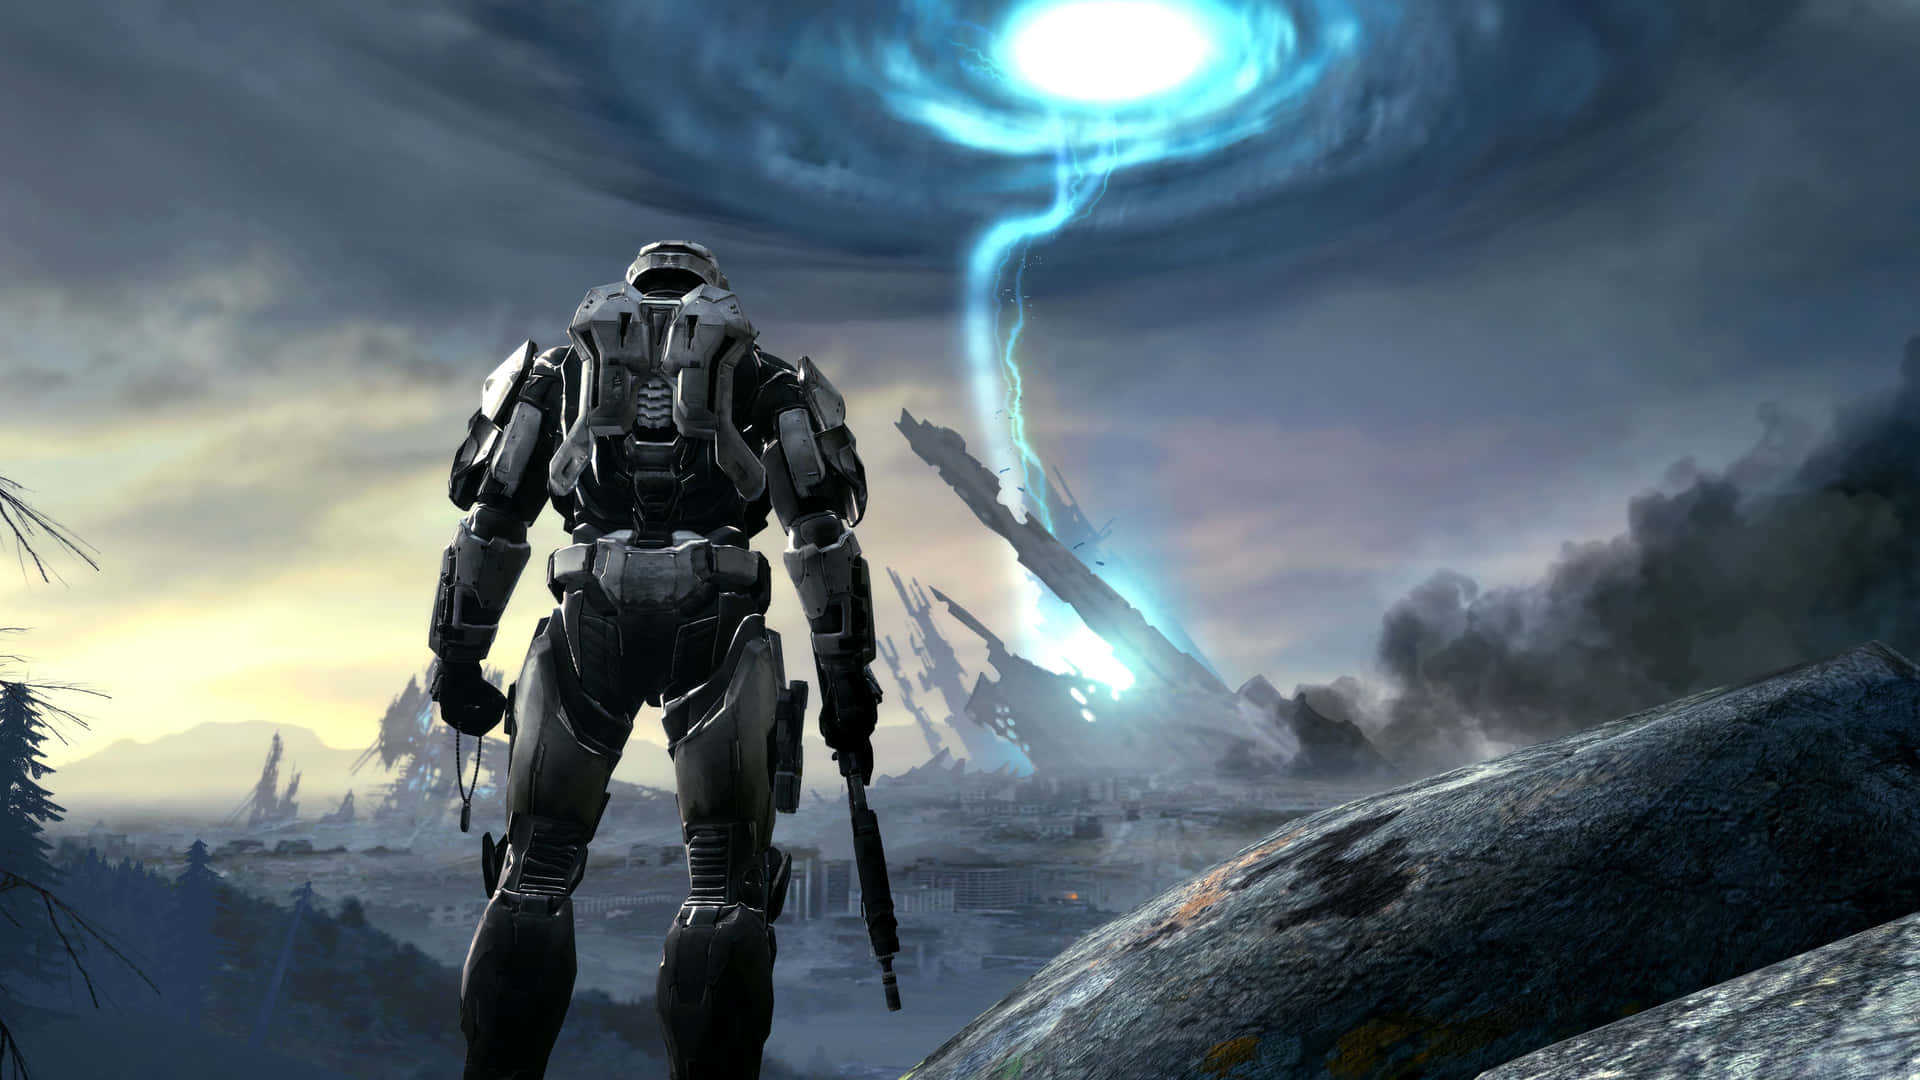 Cool Halo Soldier With A Thunder Cloud Wallpaper